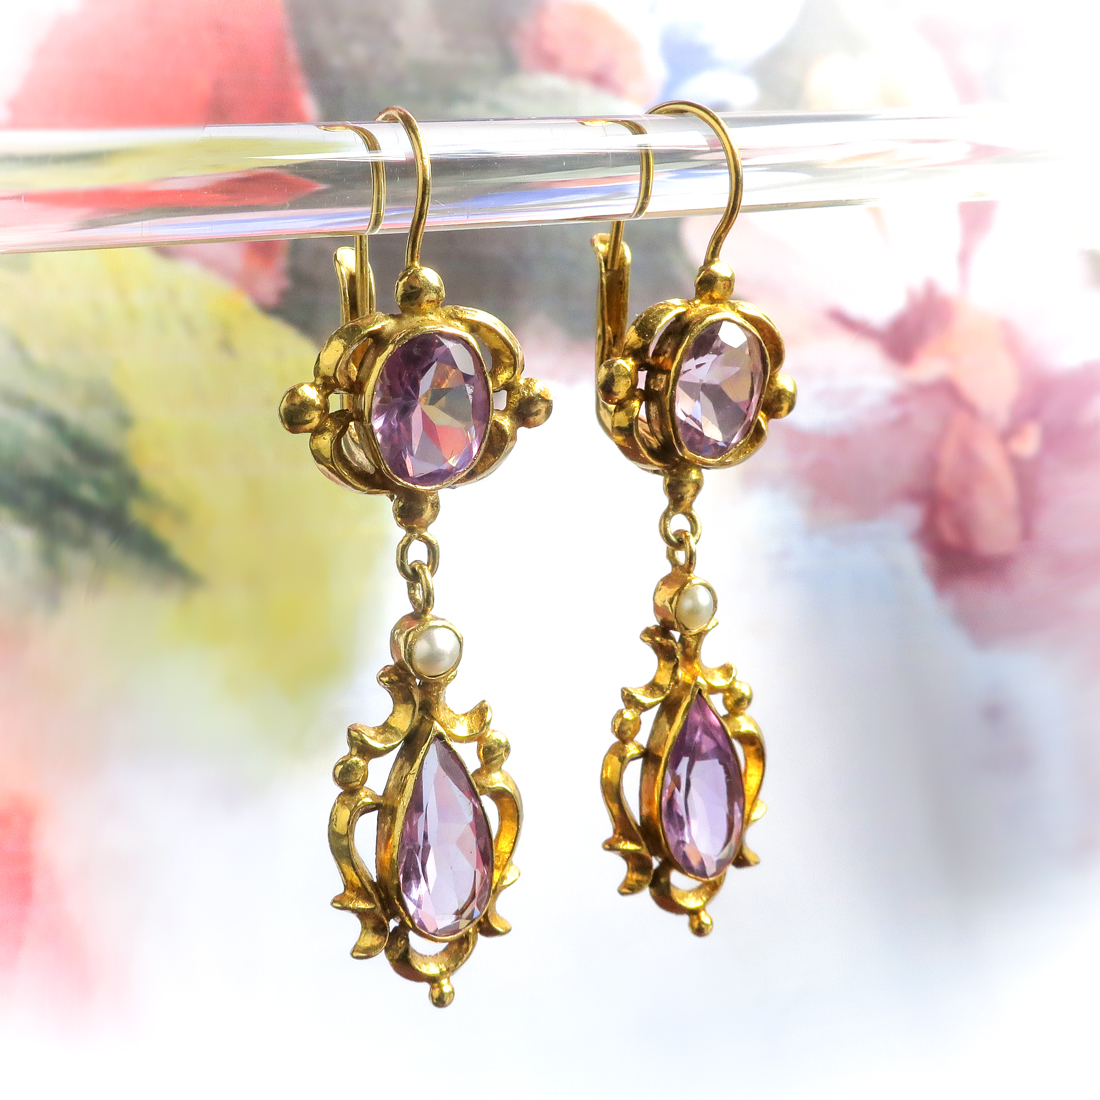 Elements Gold 9k White Gold Amethyst And Peacock Pearl Drop Earrings  GE2291M - First Class Watches™ USA